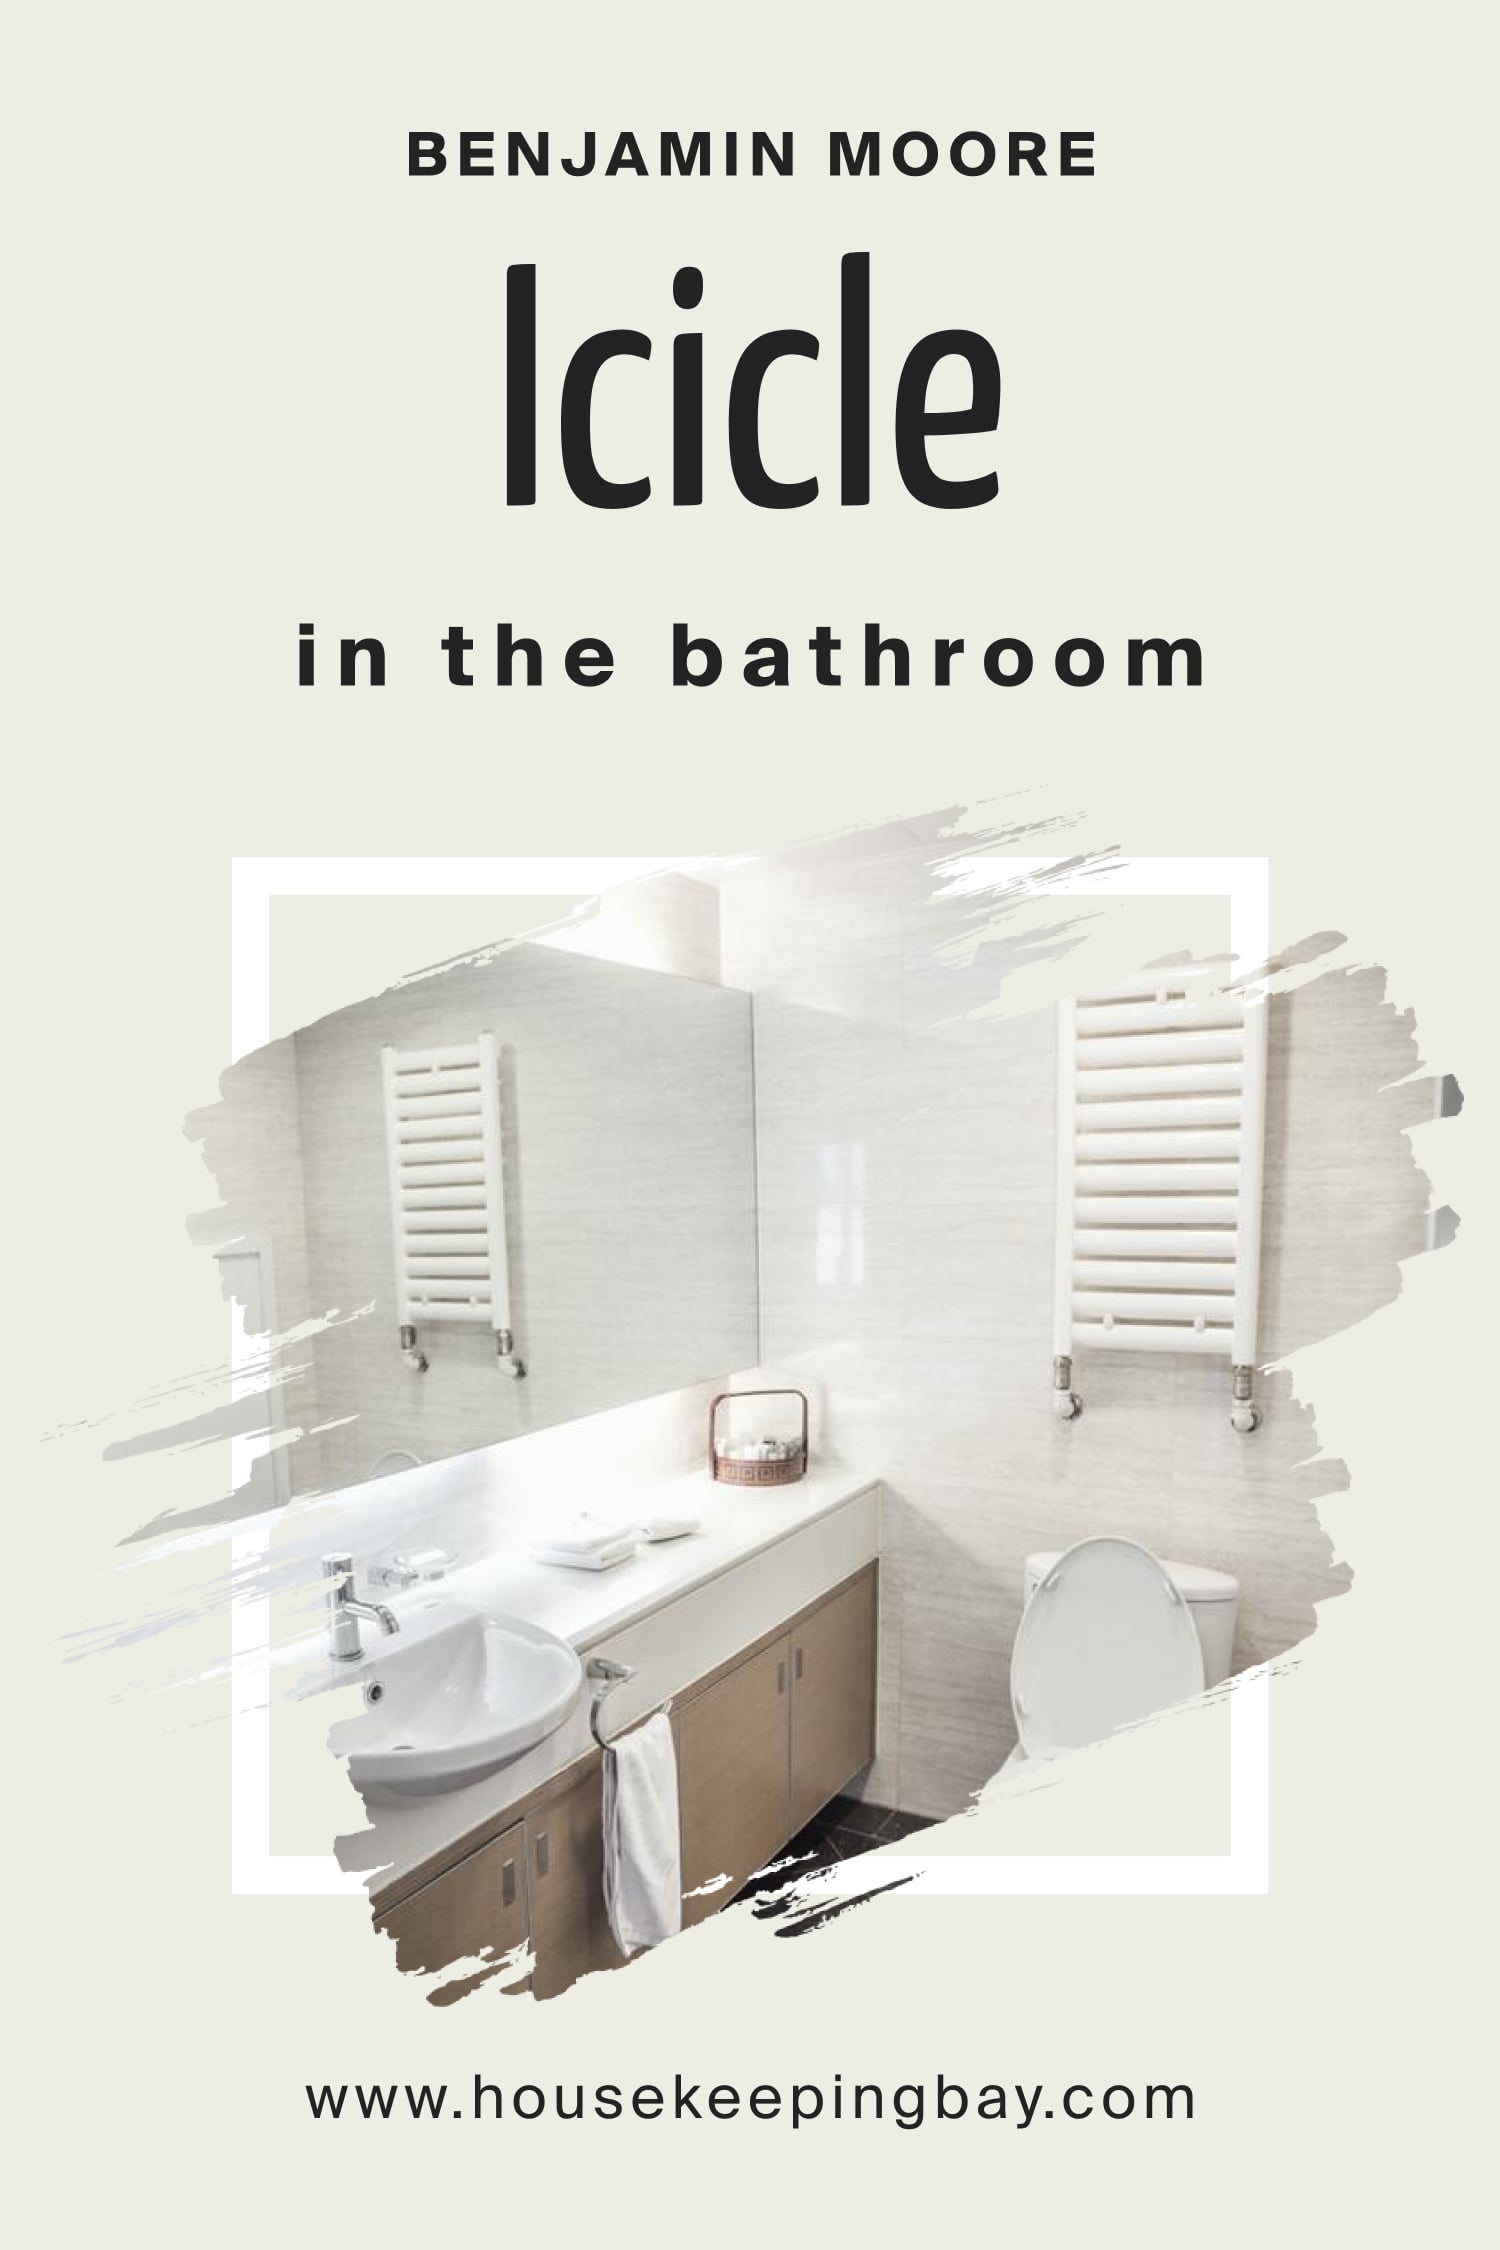 Benjamin Moore. Icicle 2142 70 for the Bathroom